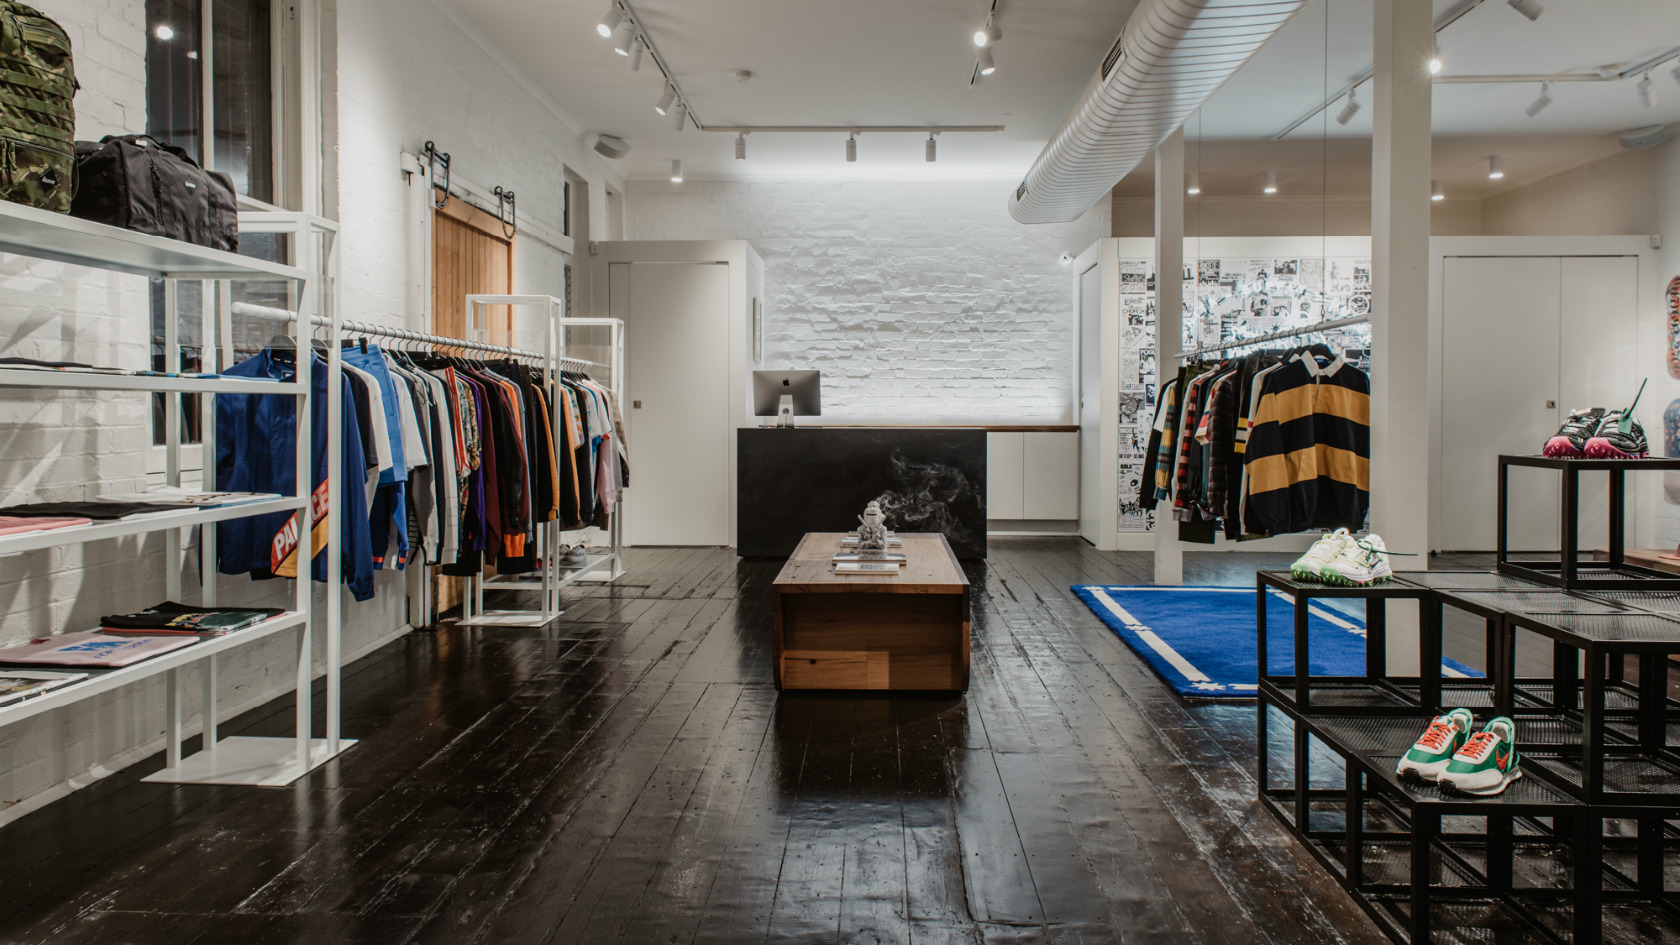 Supply Open Second Store In Melbourne CBD | lifewithoutandy